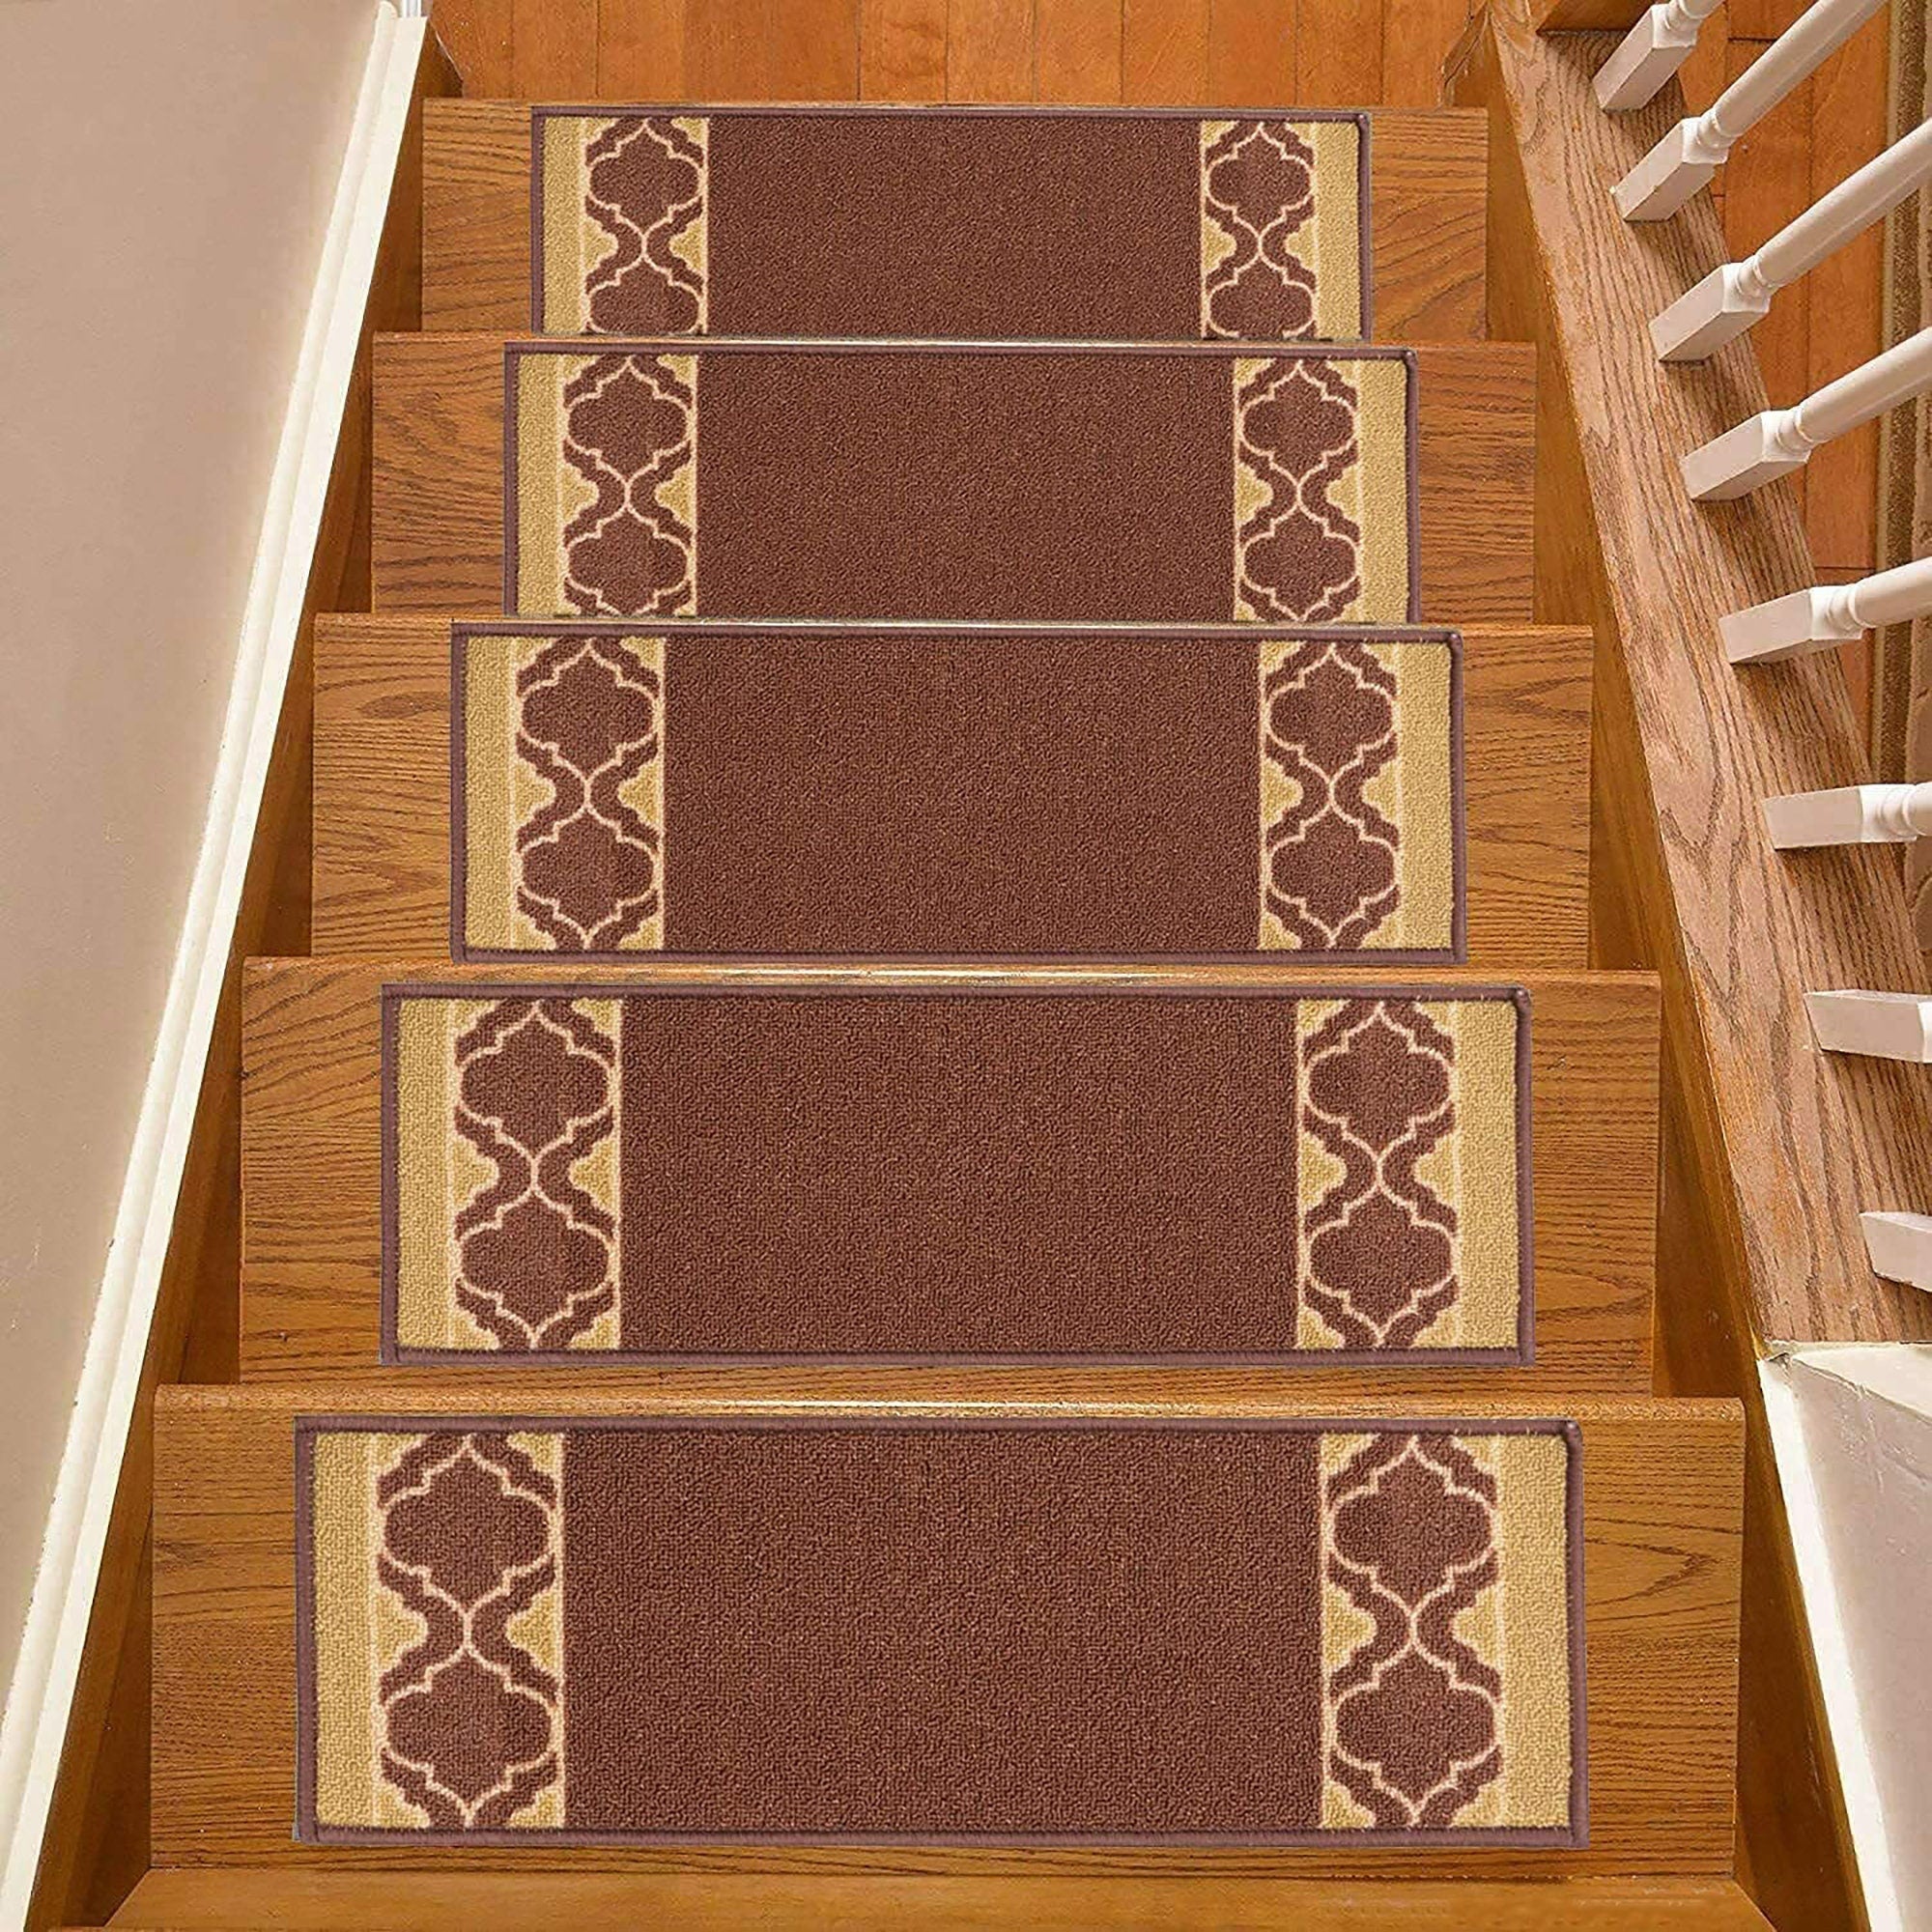 Machine Washable Stair Tread Trellis Bordered Brown Beige Skid Resistant Latex Back Carpet Stair Treads Size 8.5" x 26" Many Set Options